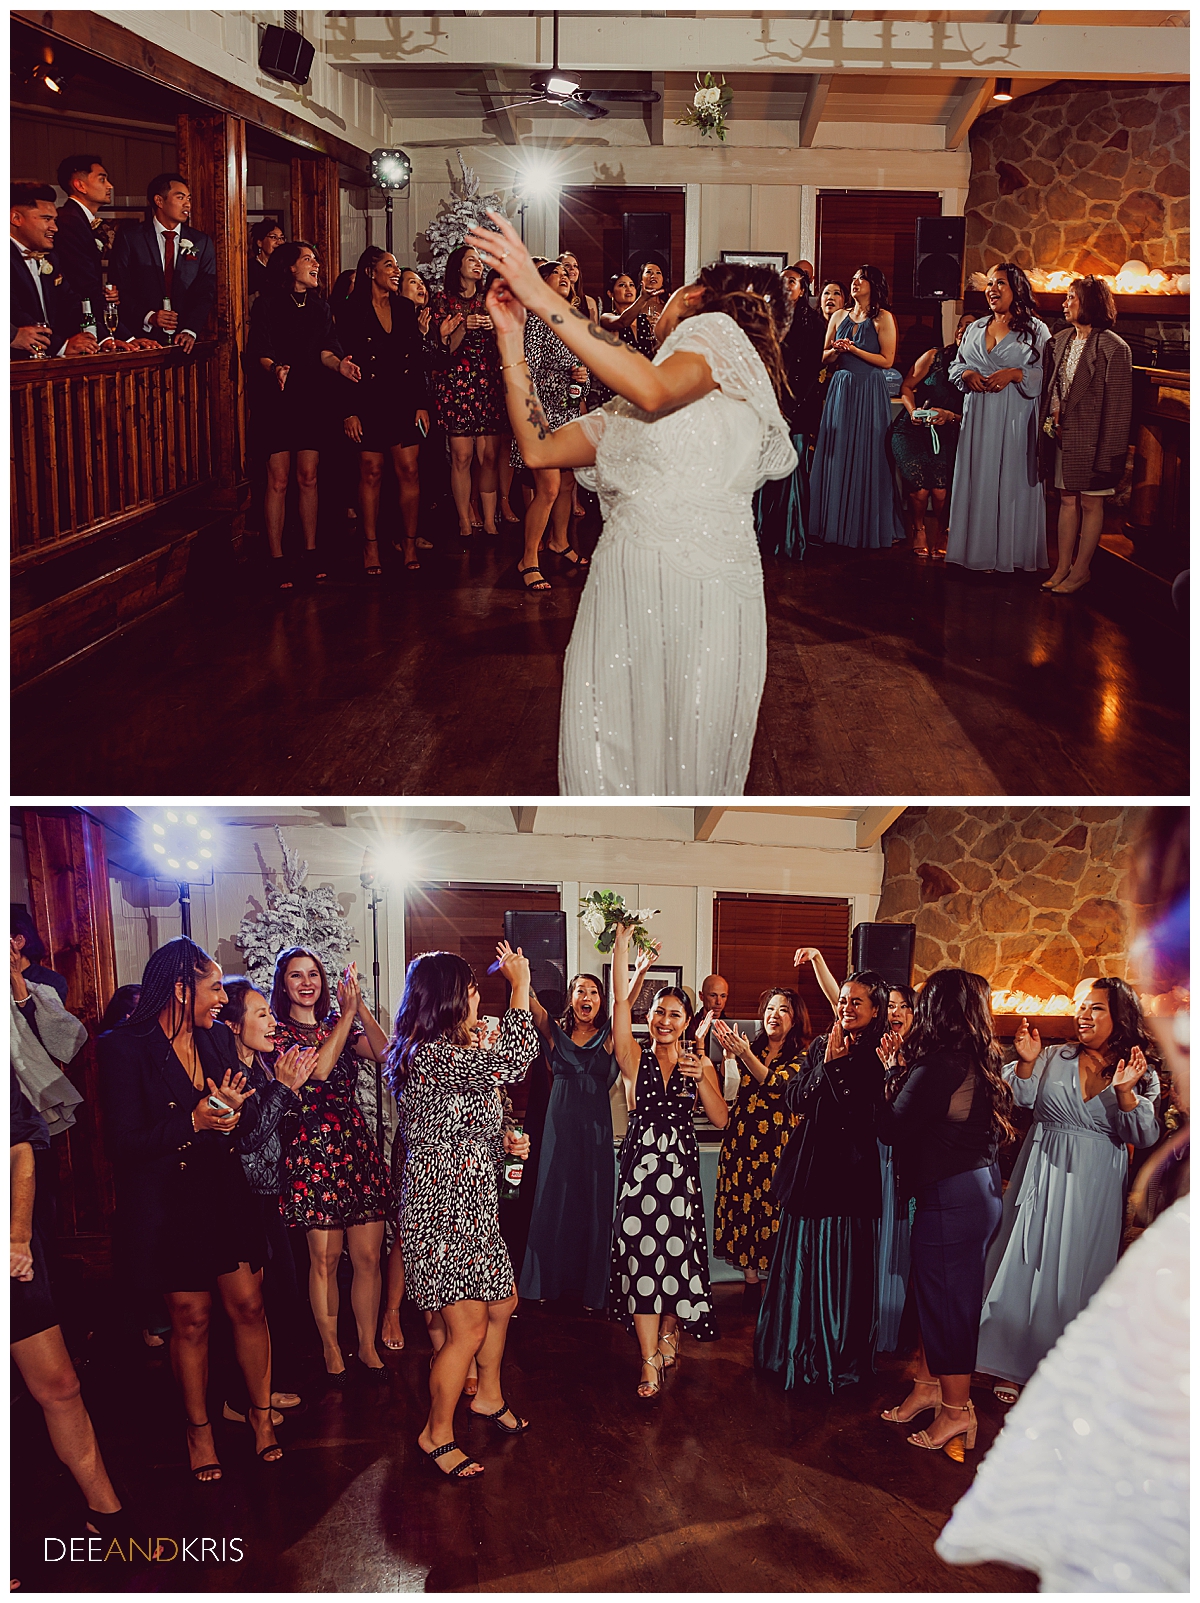 Two images of of bouquet toss.